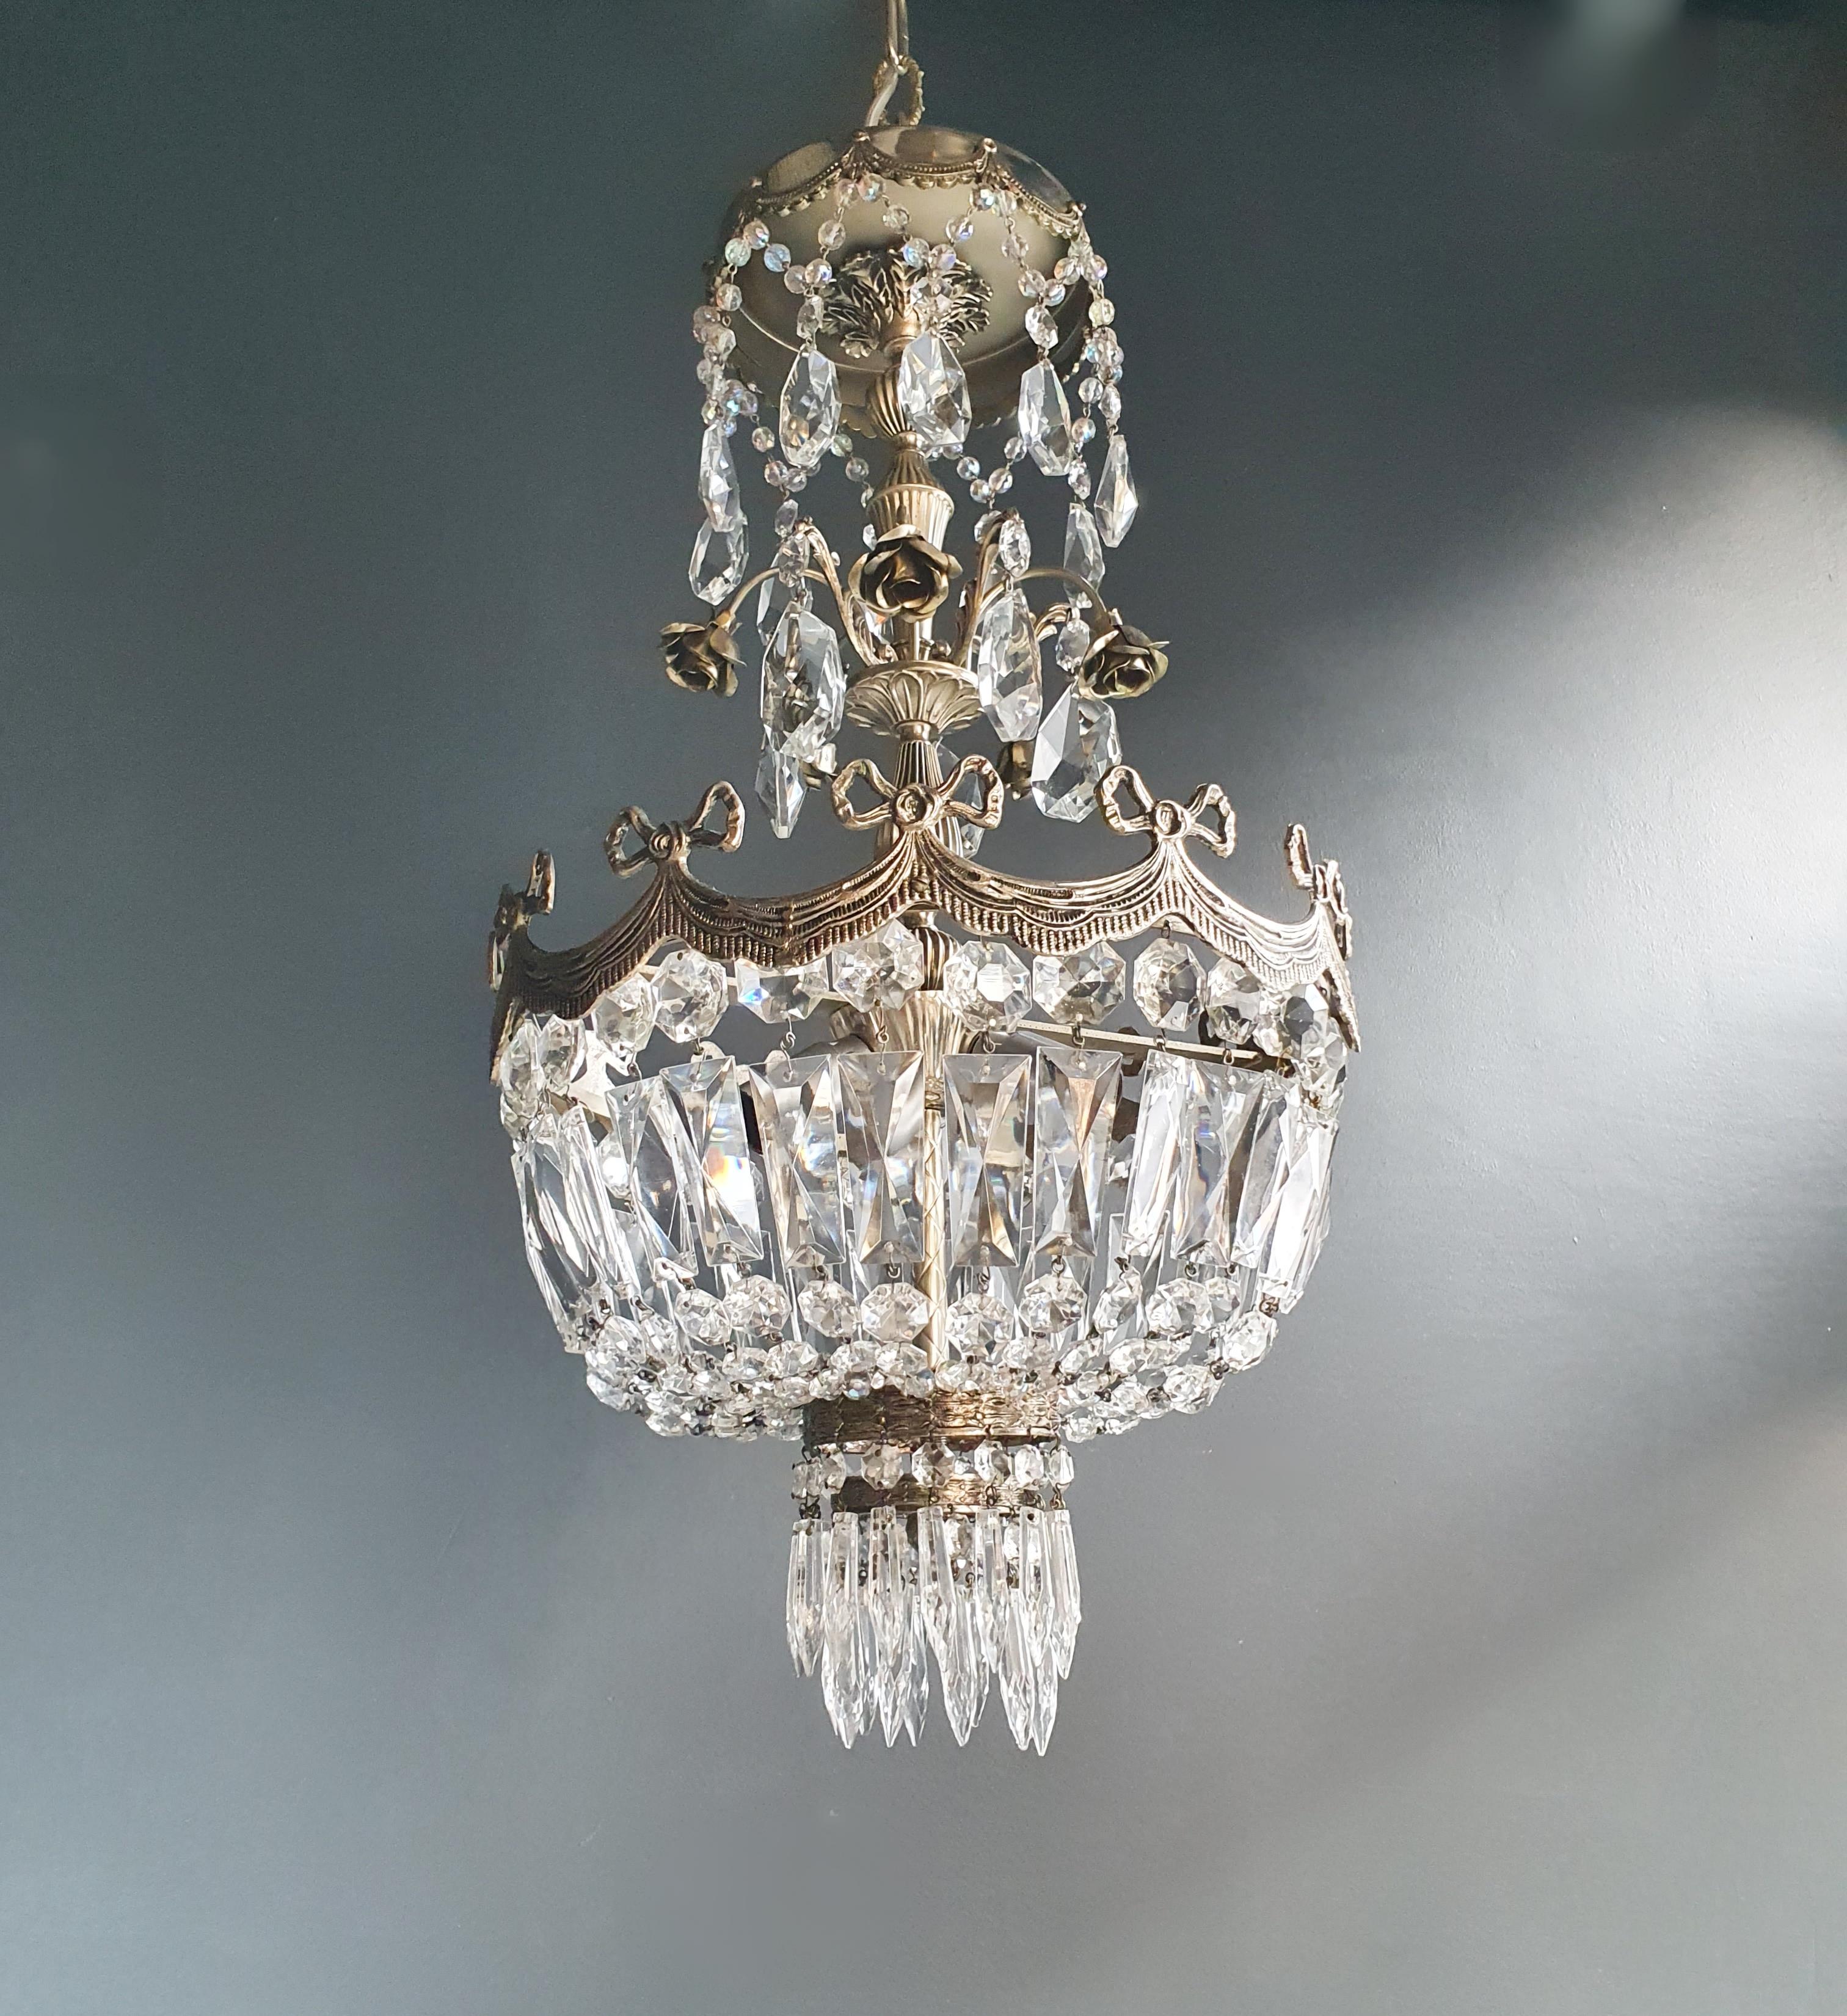 Silver rose brass crystal chandelier antique ceiling lamp lustre Art Nouveau

Measures: Total height 90 cm, height without chain 55 cm diameter 33 cm. Weight (approximately) 7kg.

Number of lights: 3-light bulb sockets: E14
Material: Brass,